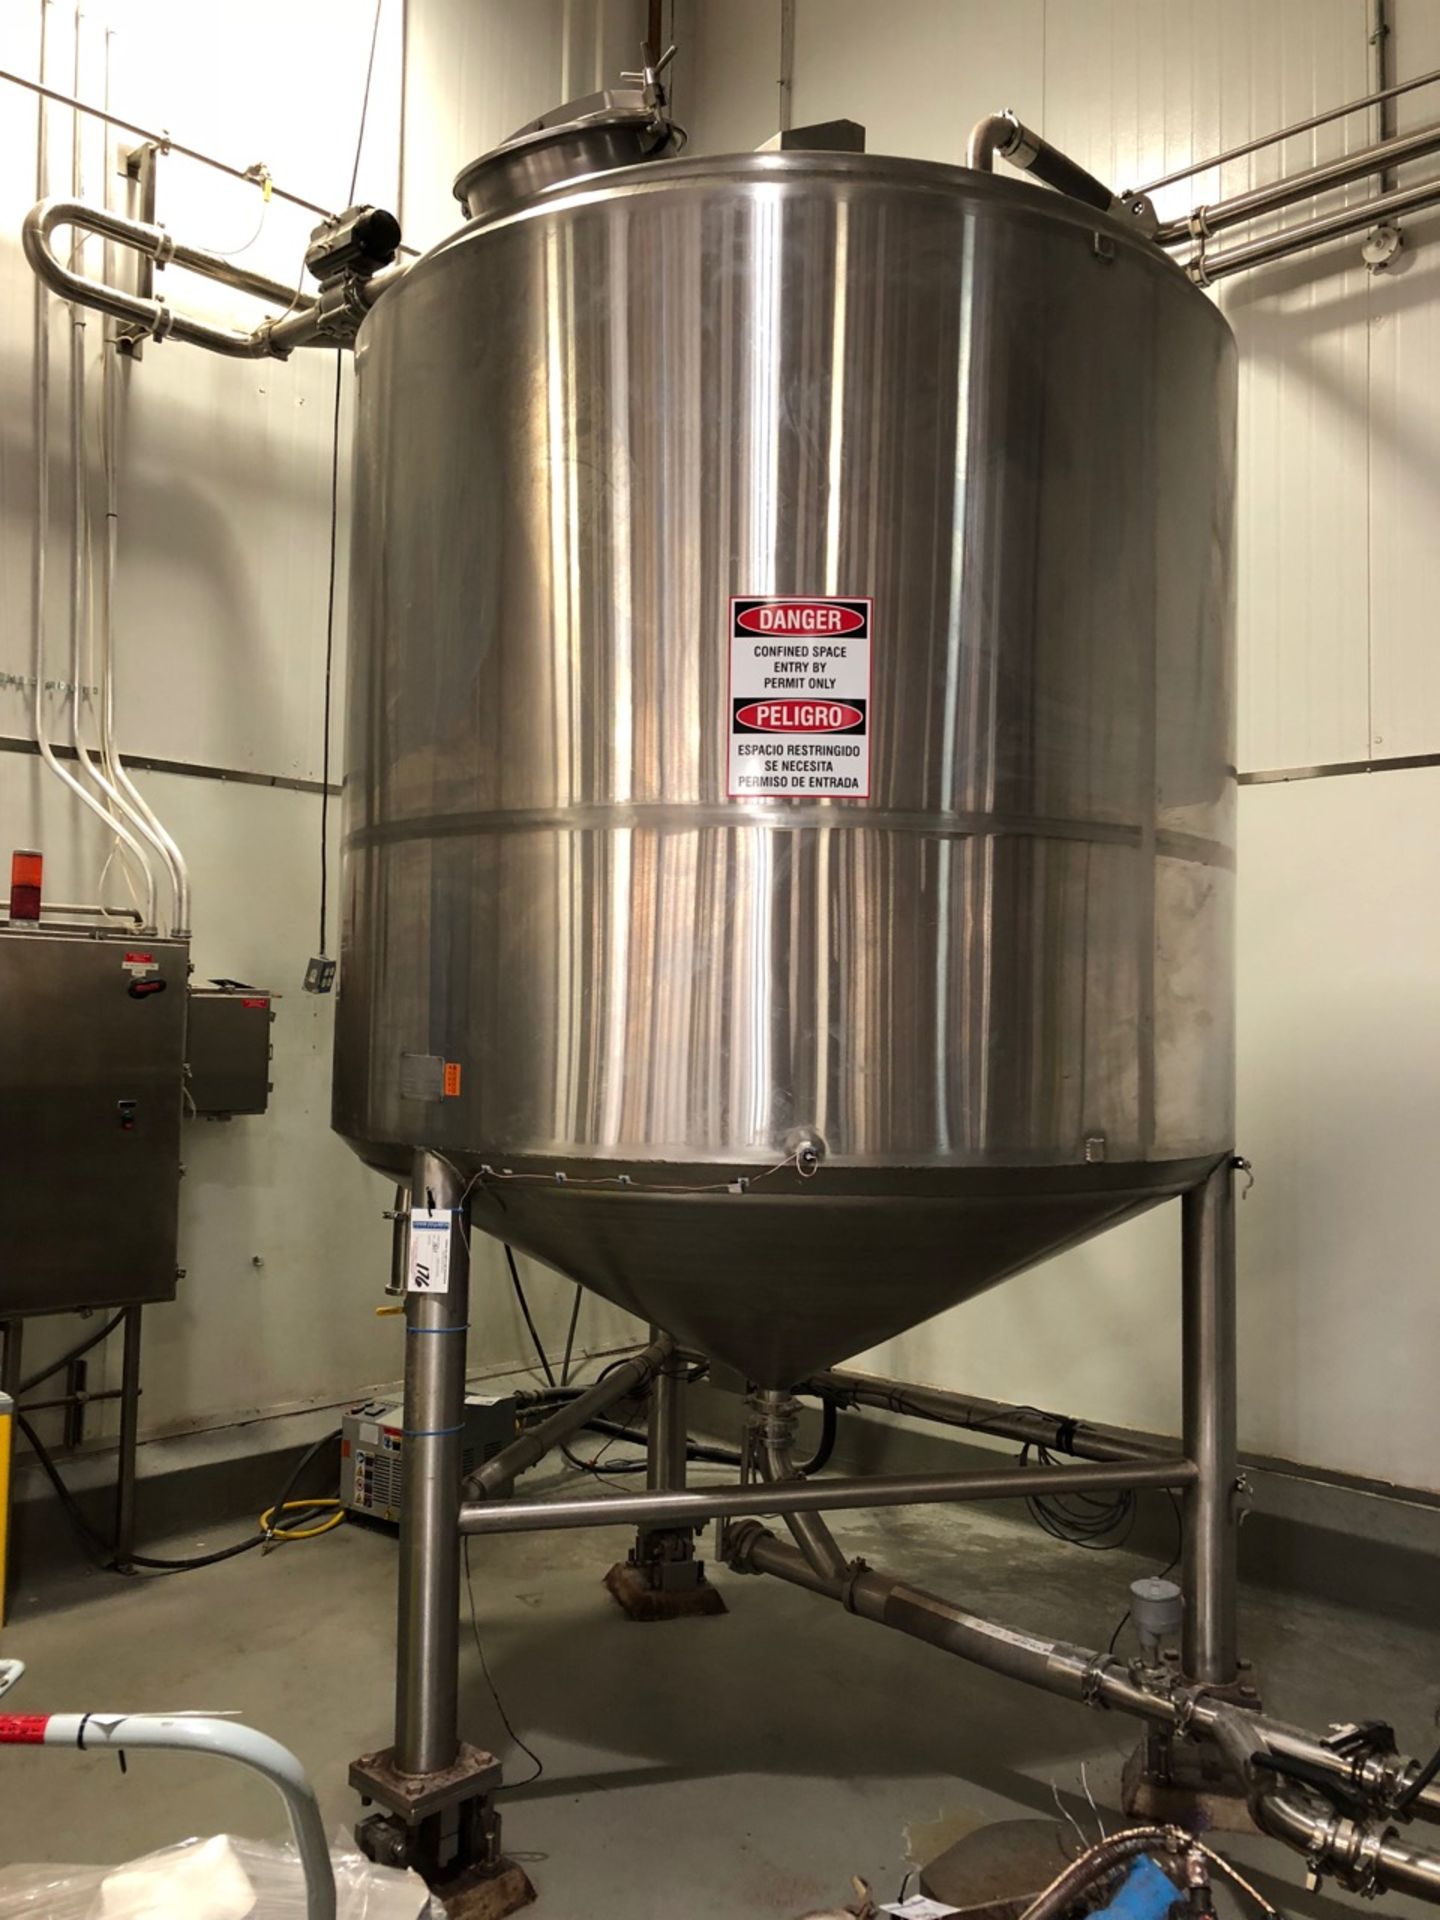 Maker Engineering 1500 Gallon | Maker Engineering 1500 Gallon Stainless Tank. S/N 20055276. On